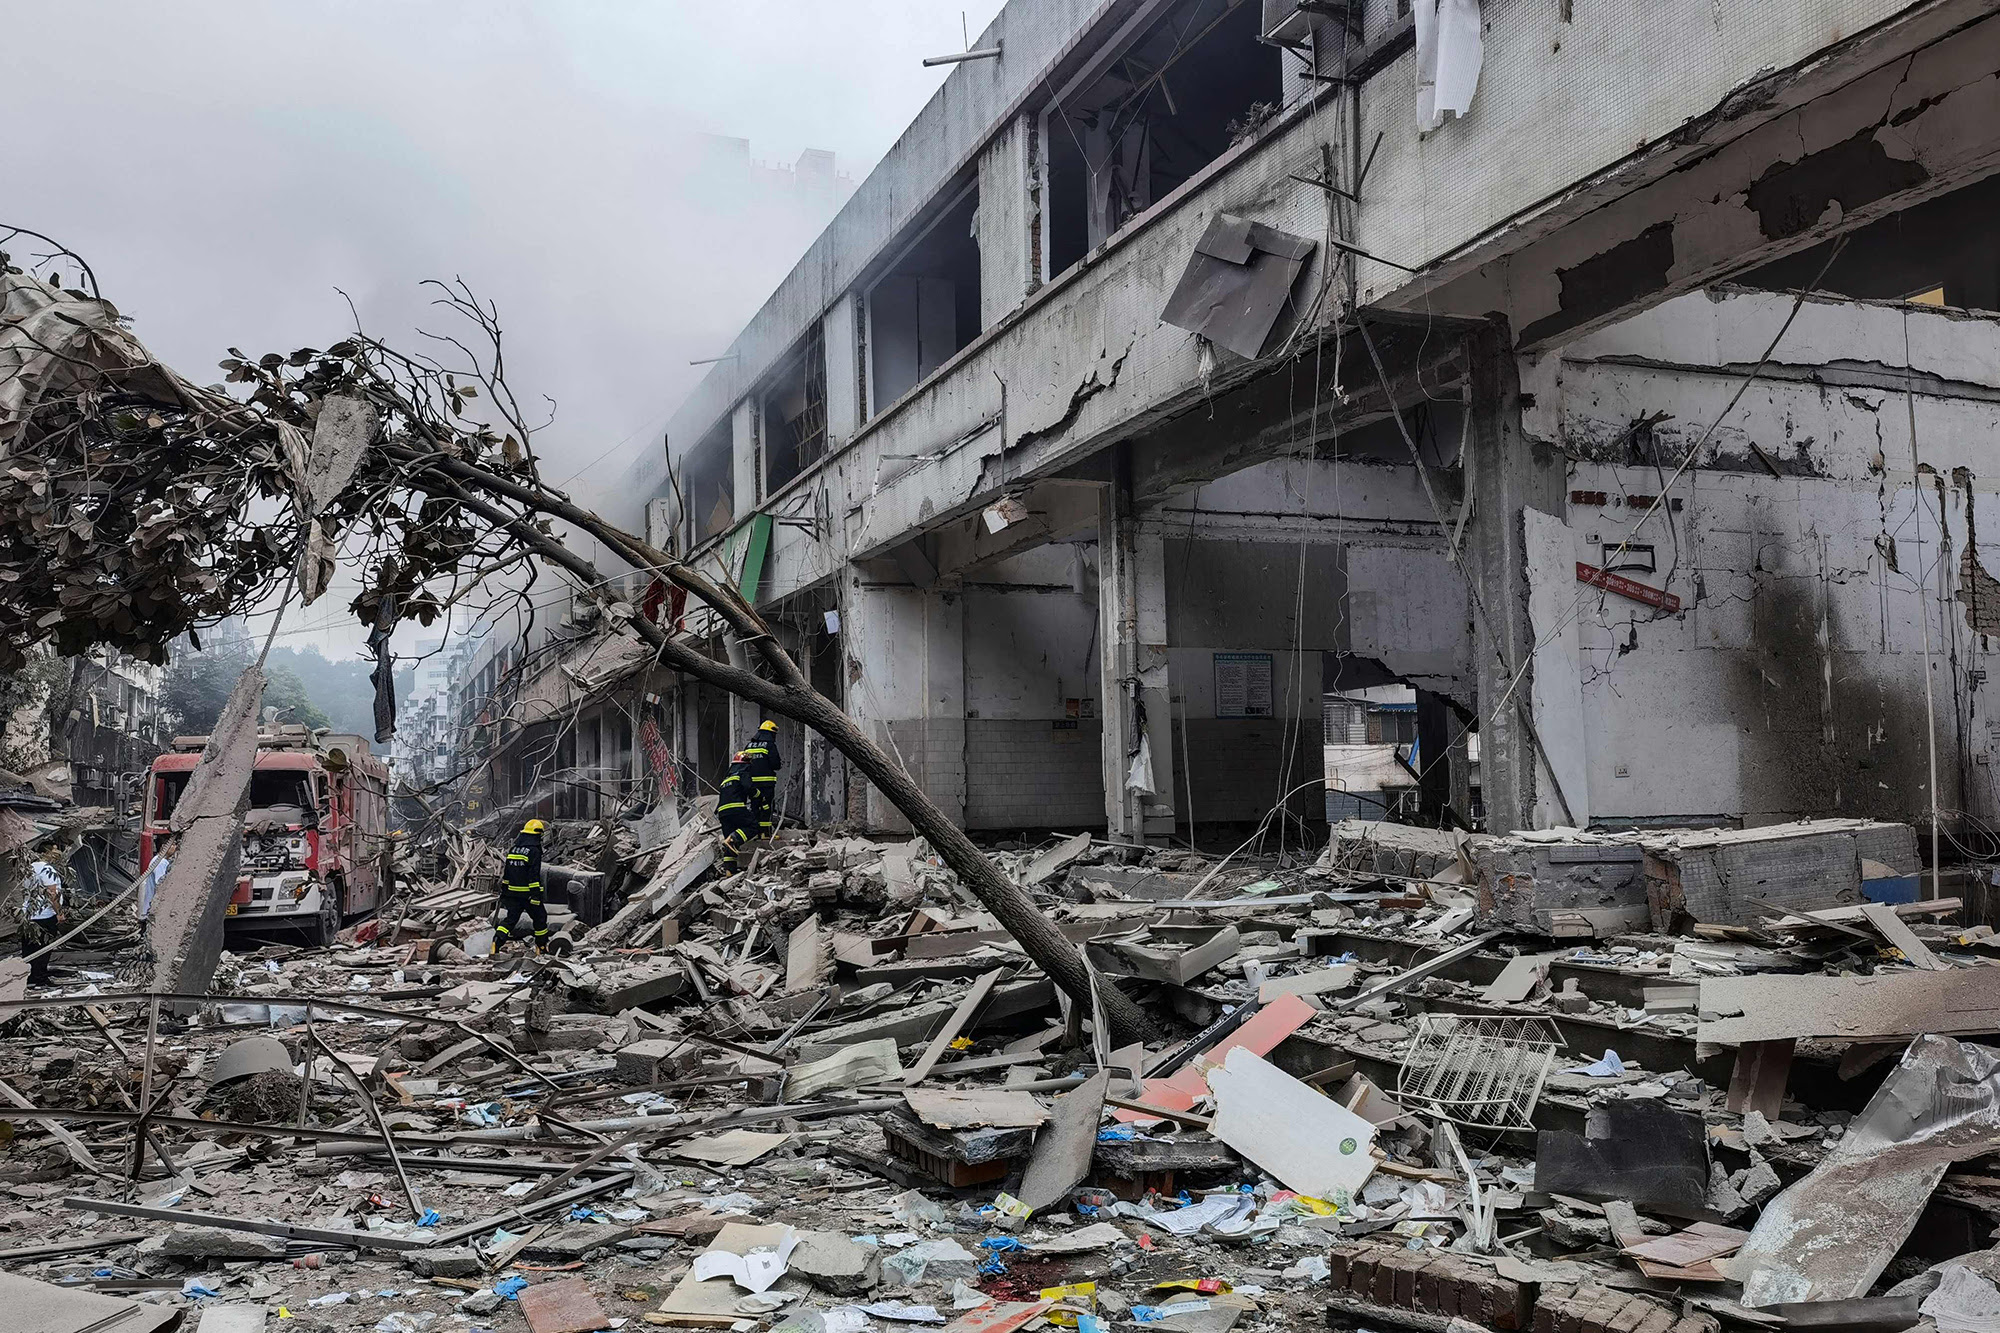 A heavily damaged building and piles of debris in the street are seen after a gas explosion in China 